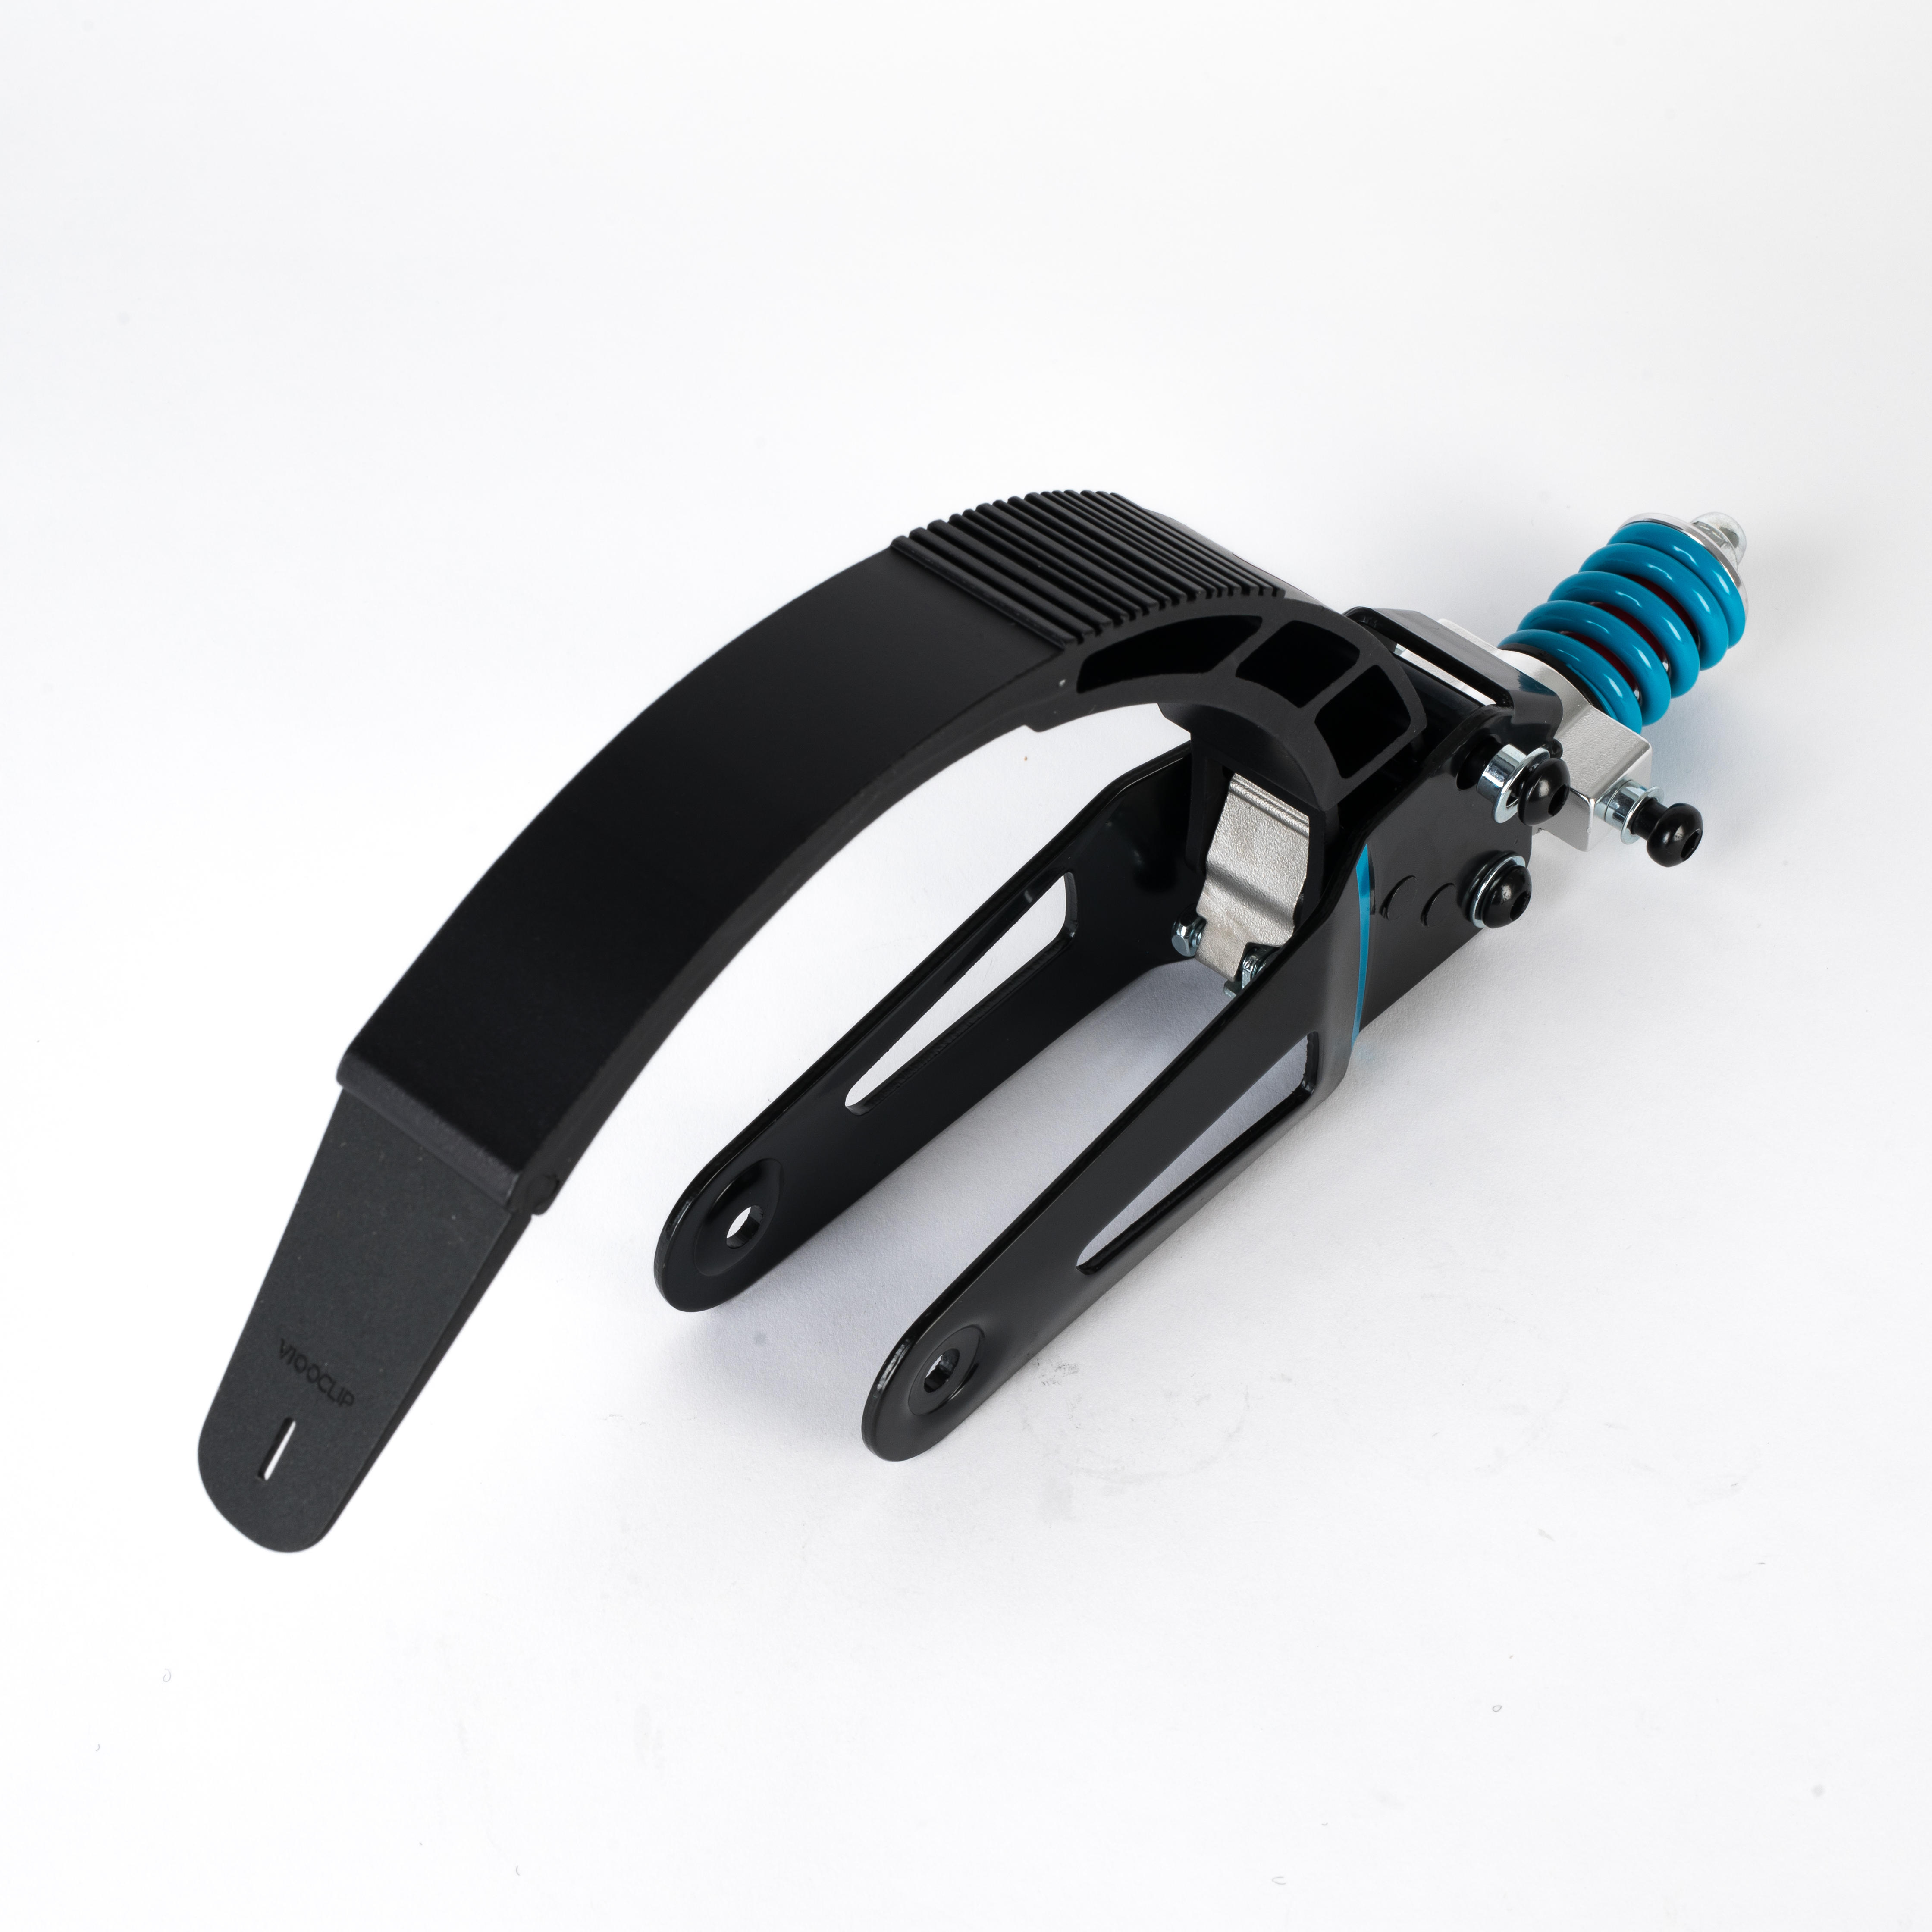 Image of Town 7 XL Scooter Mudguard Rear Brake and Shock Absorber Set